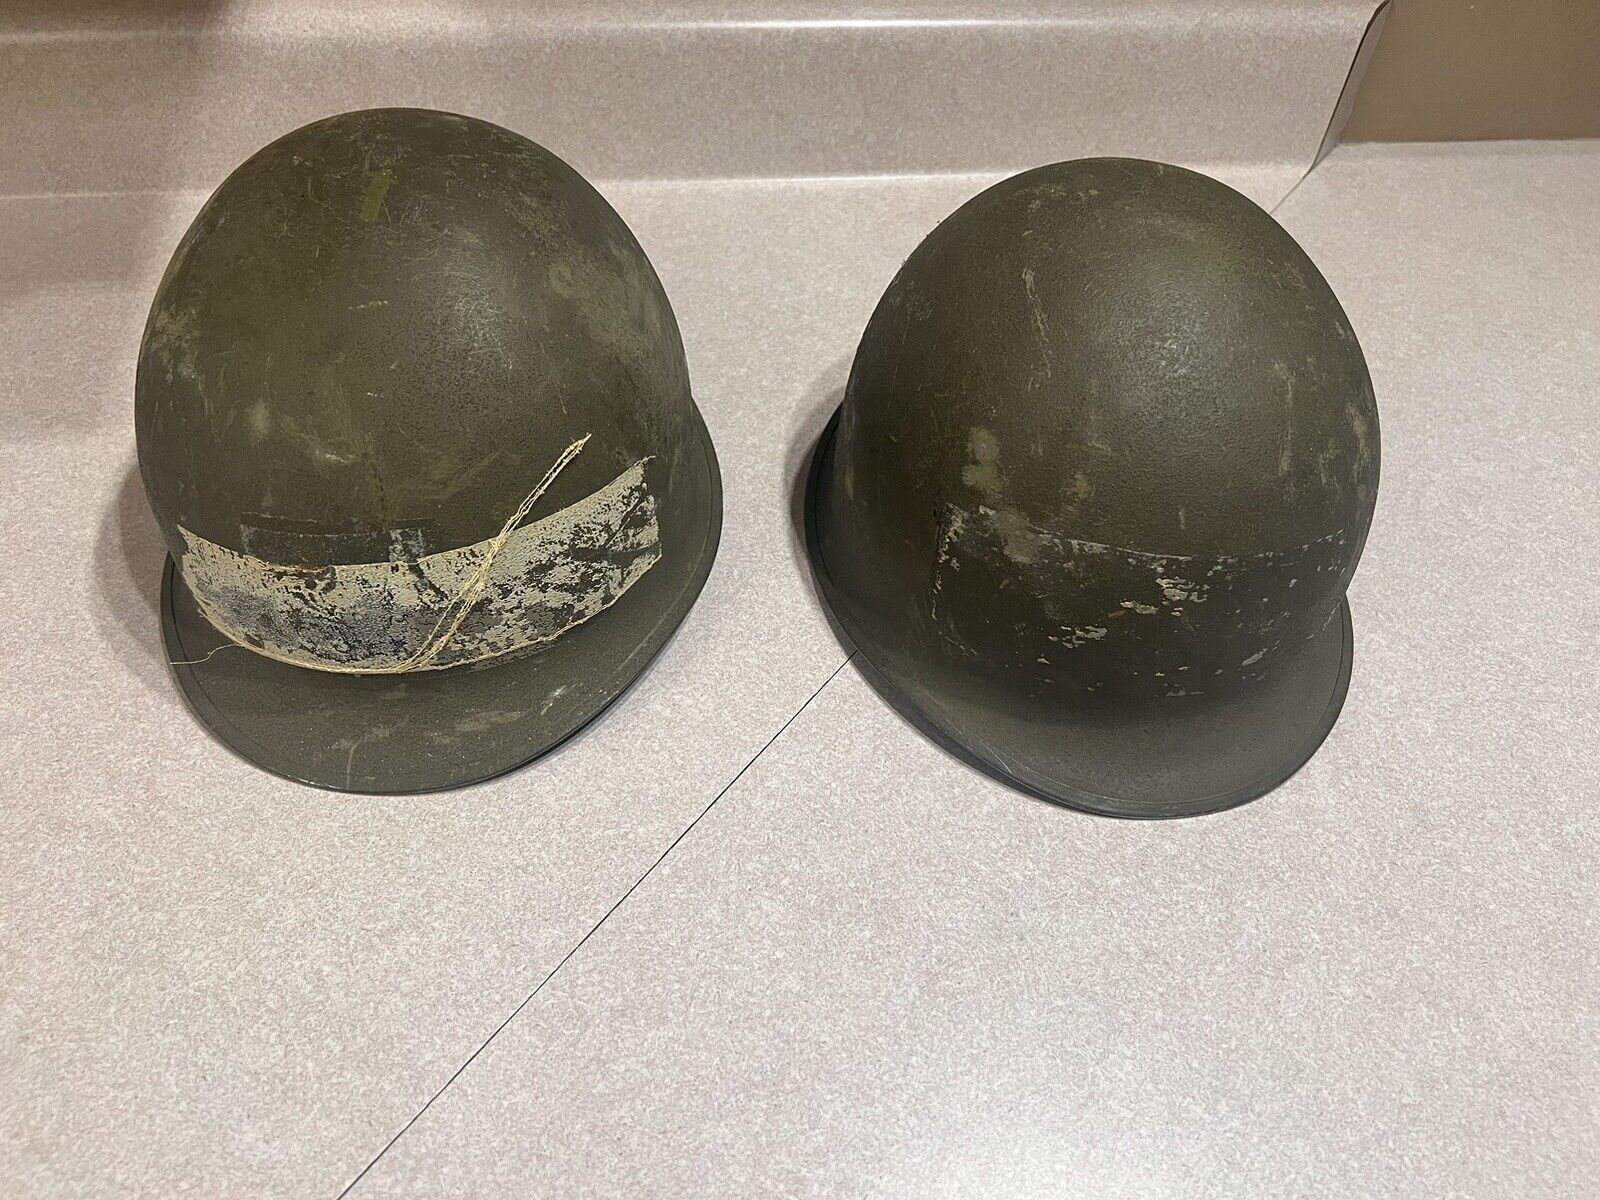 MILITARY SURPLUS 2 VINTAGE HELMETS WITH STRAPS NICE CONDITION